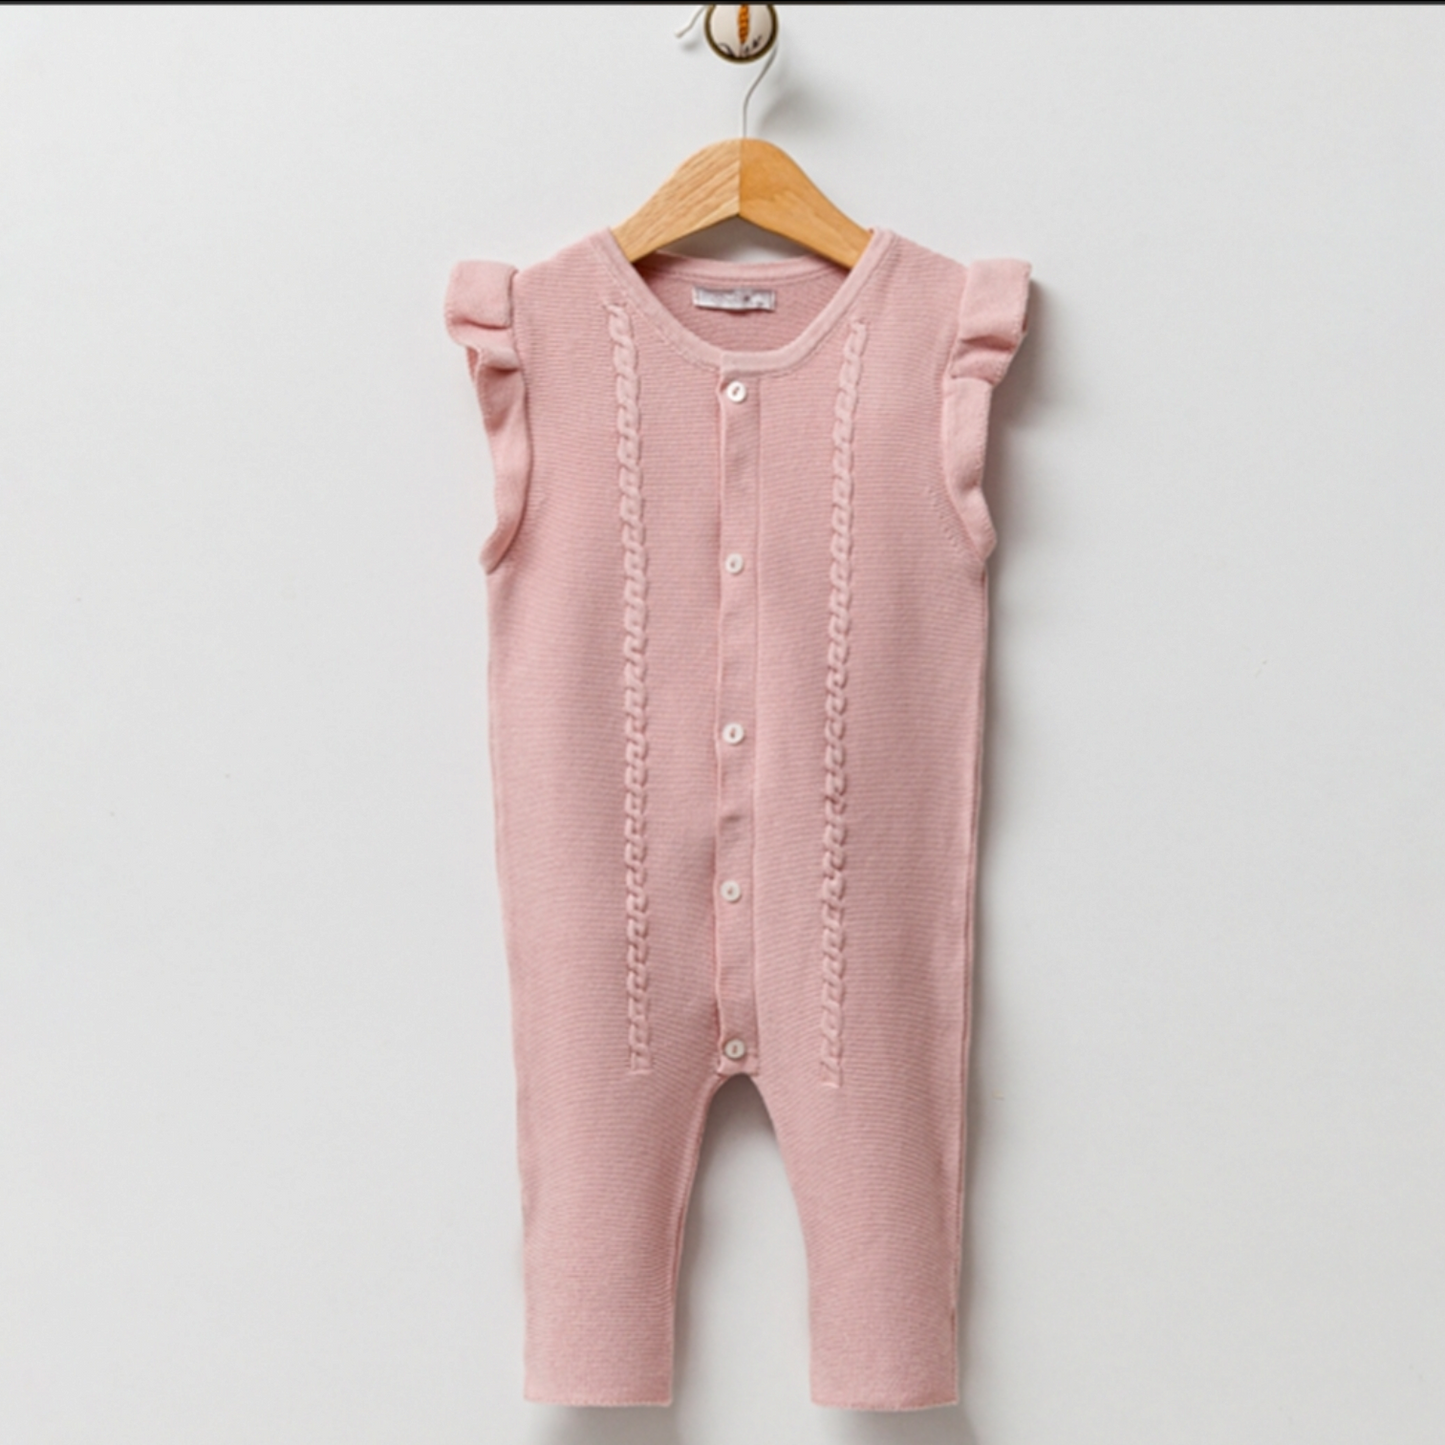 Dungarees with ruffles